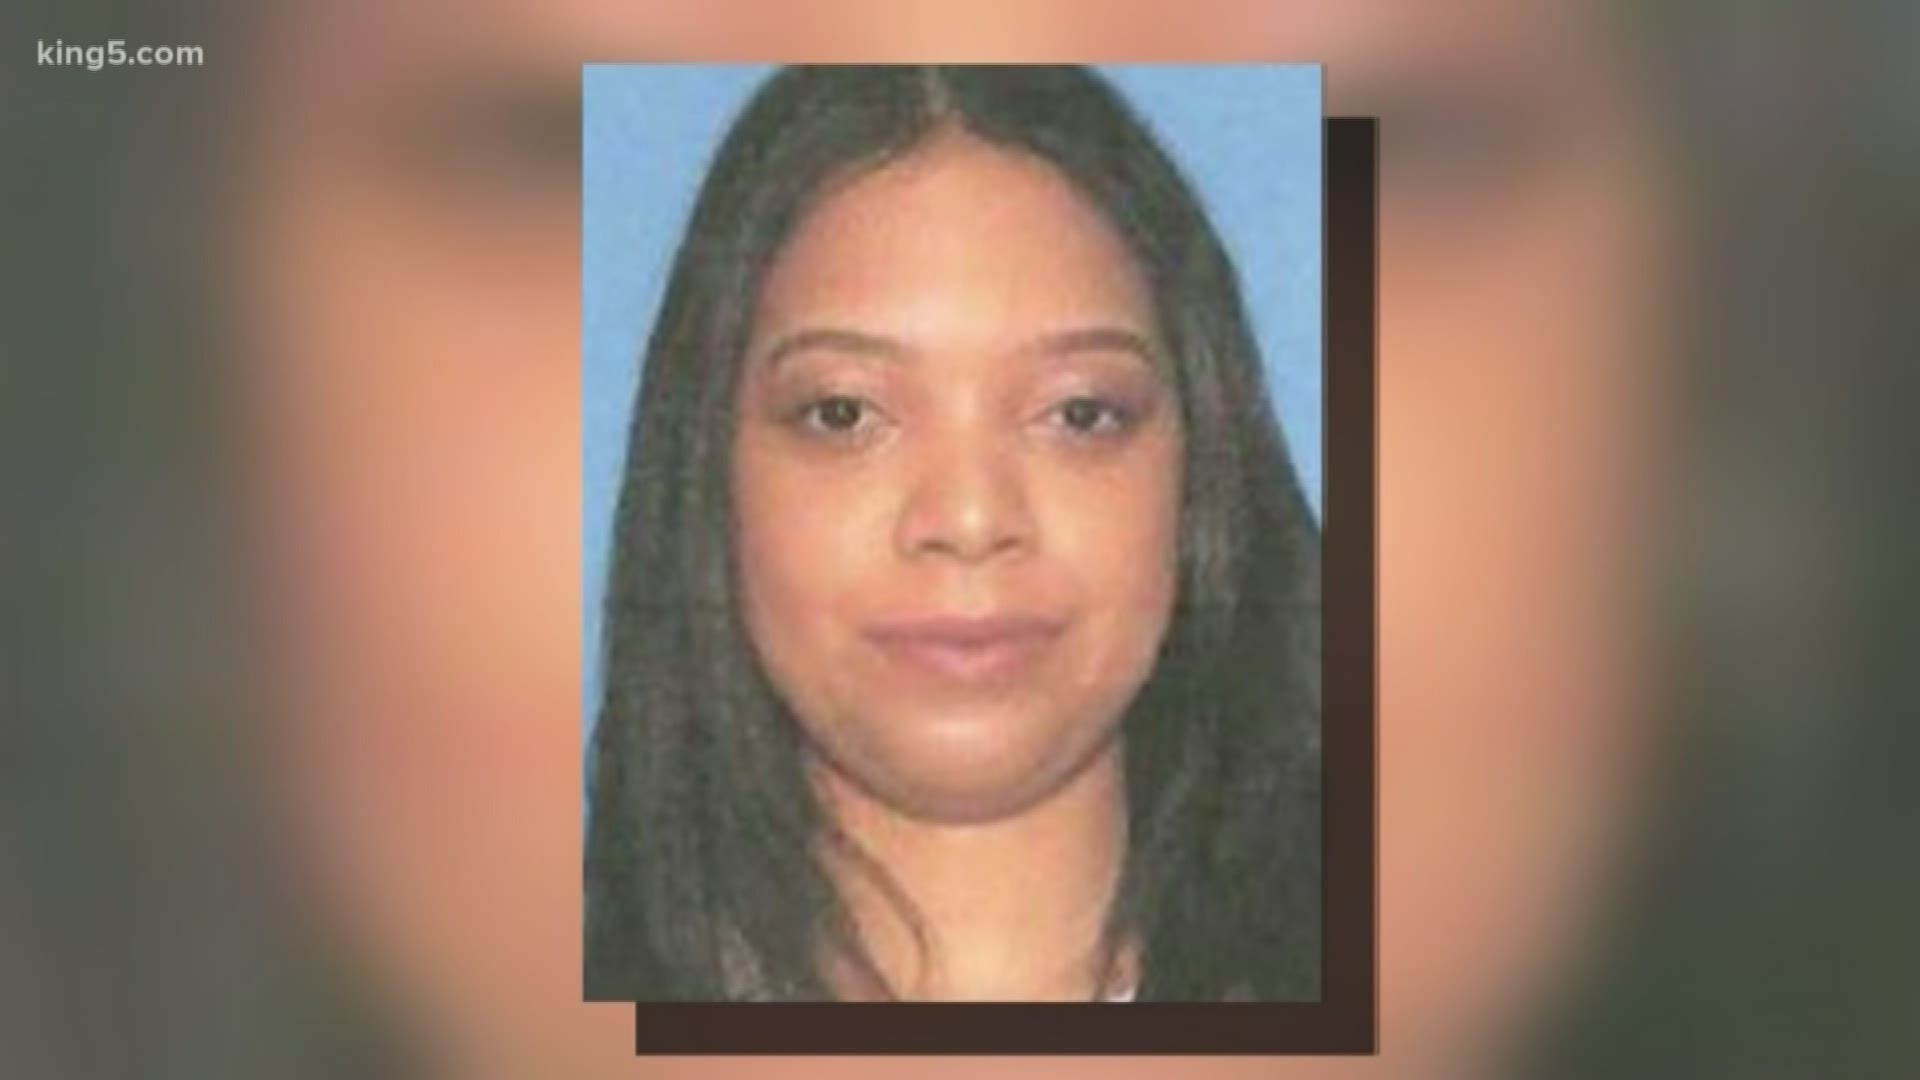 Bremerton police are asking for the public’s help locating a missing 30-year-old woman. Sherilyn Lee works as a security guard in downtown Bremerton, but never made it home after her shift last Thursday.